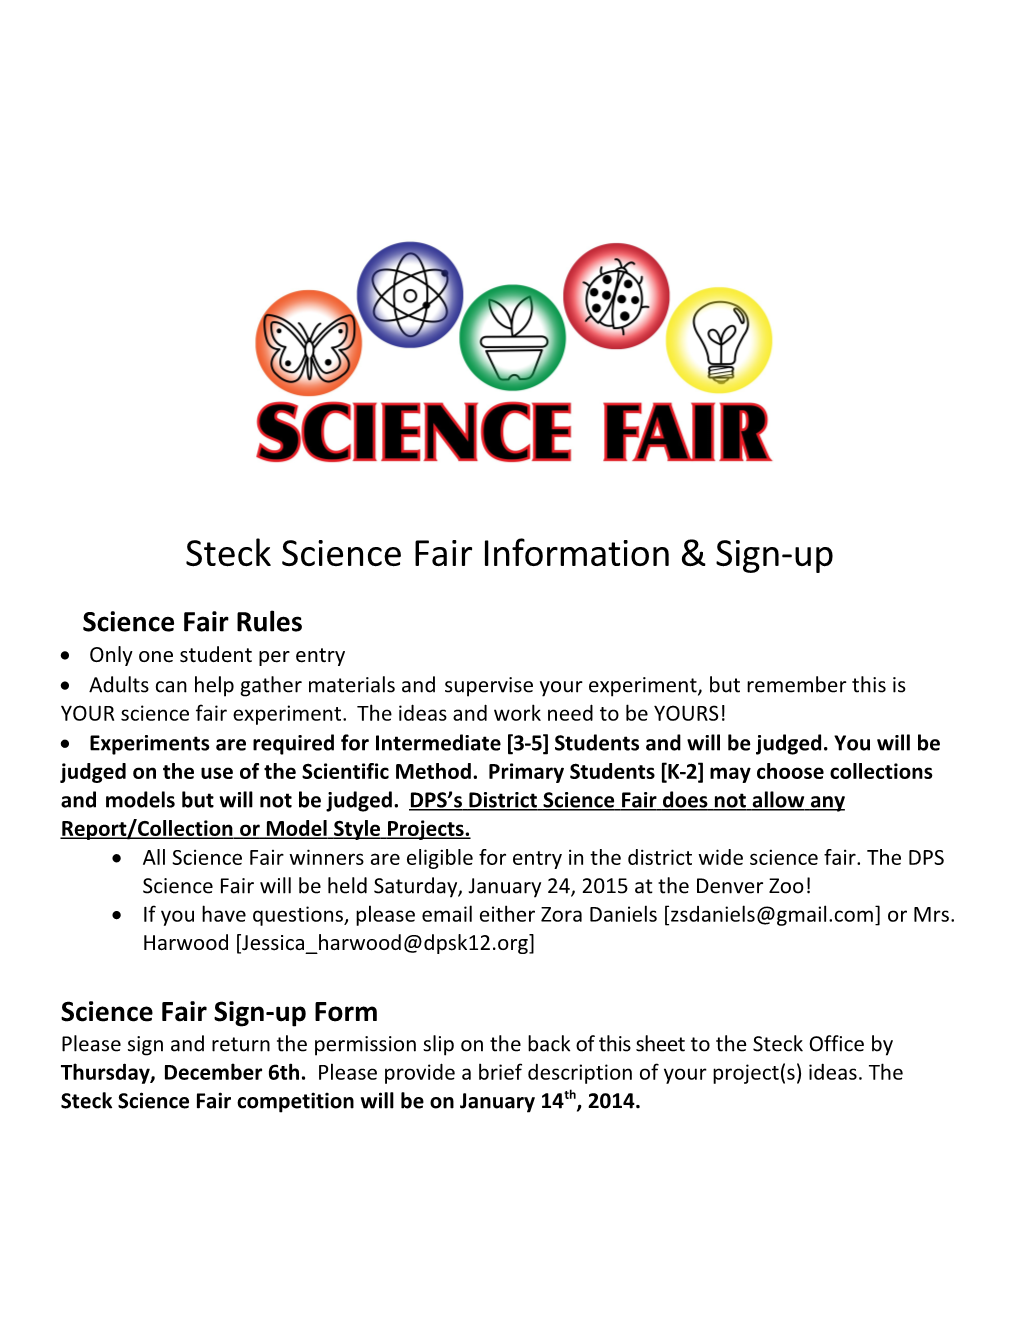 Steck Science Fair Information & Sign-Up